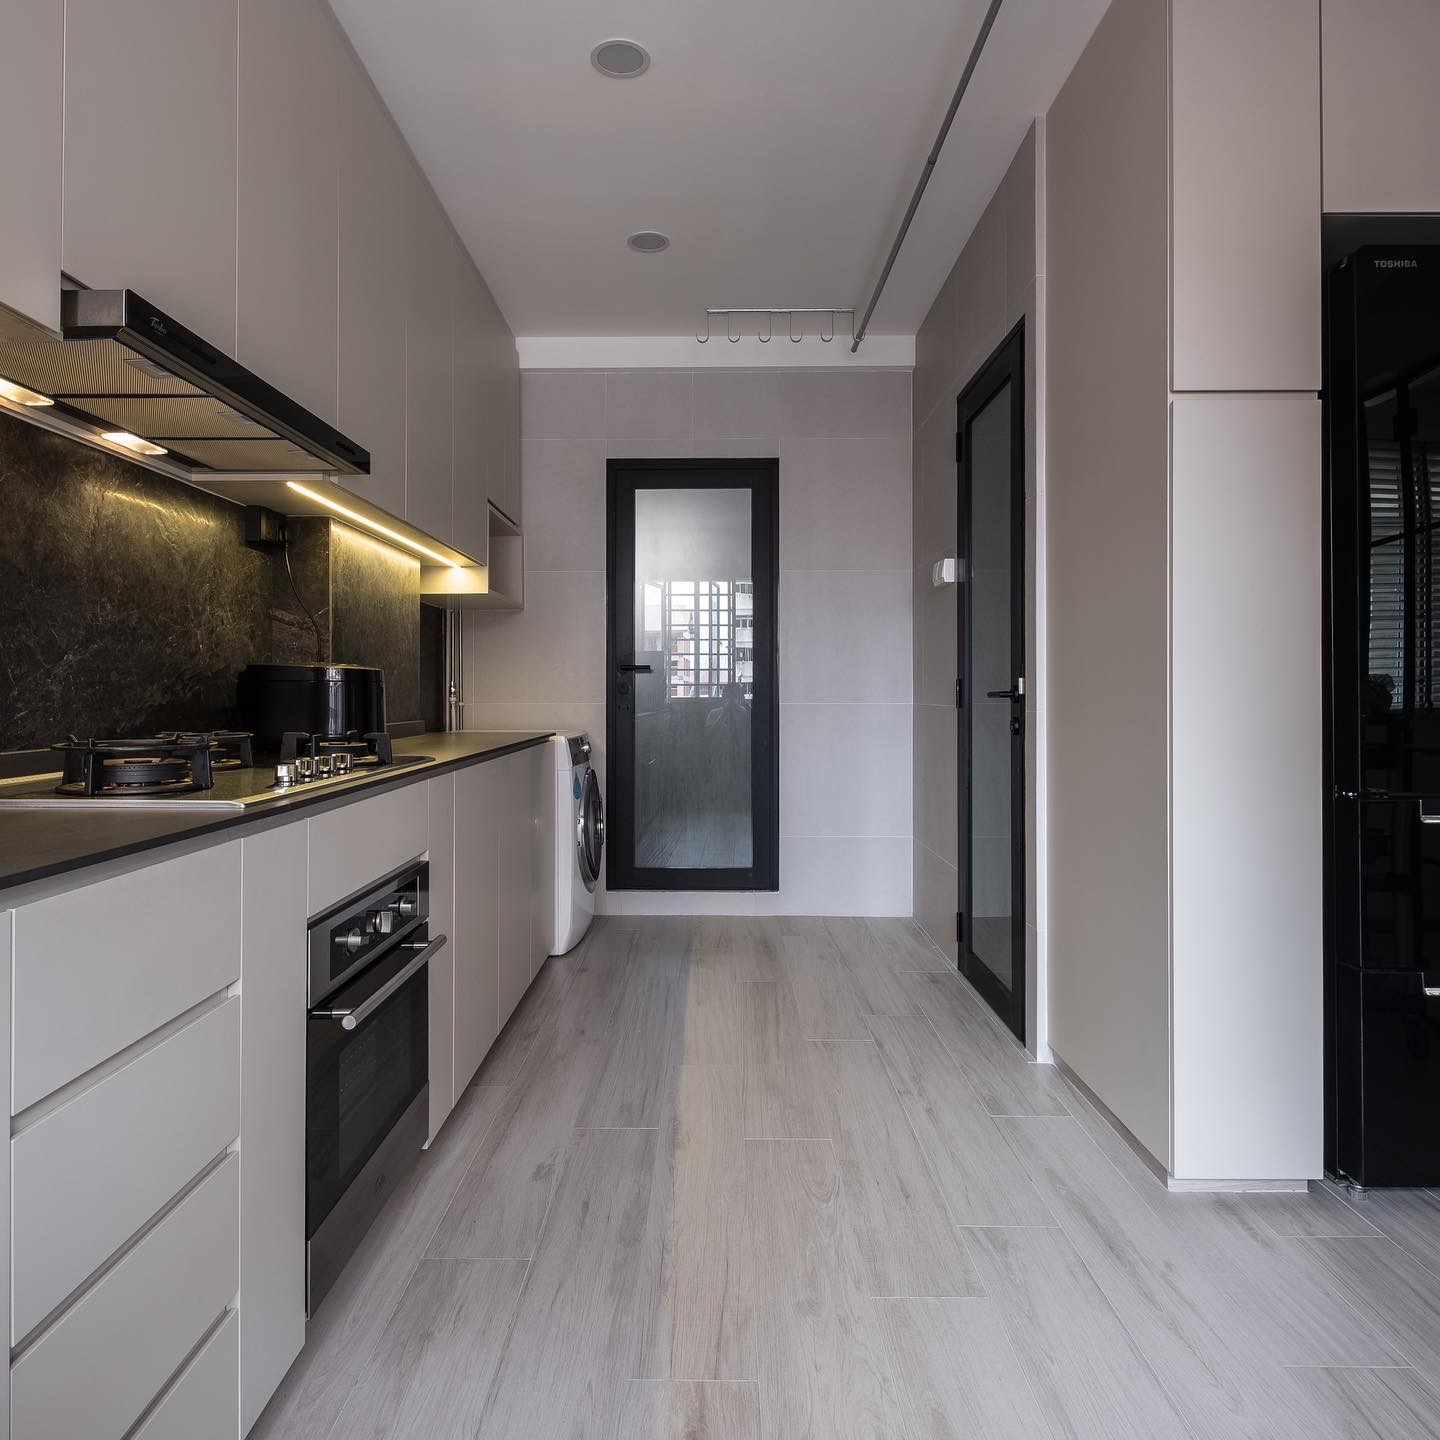 Contemporary, Modern, Others Design - Kitchen - HDB Executive Apartment - Design by United Team Lifestyle